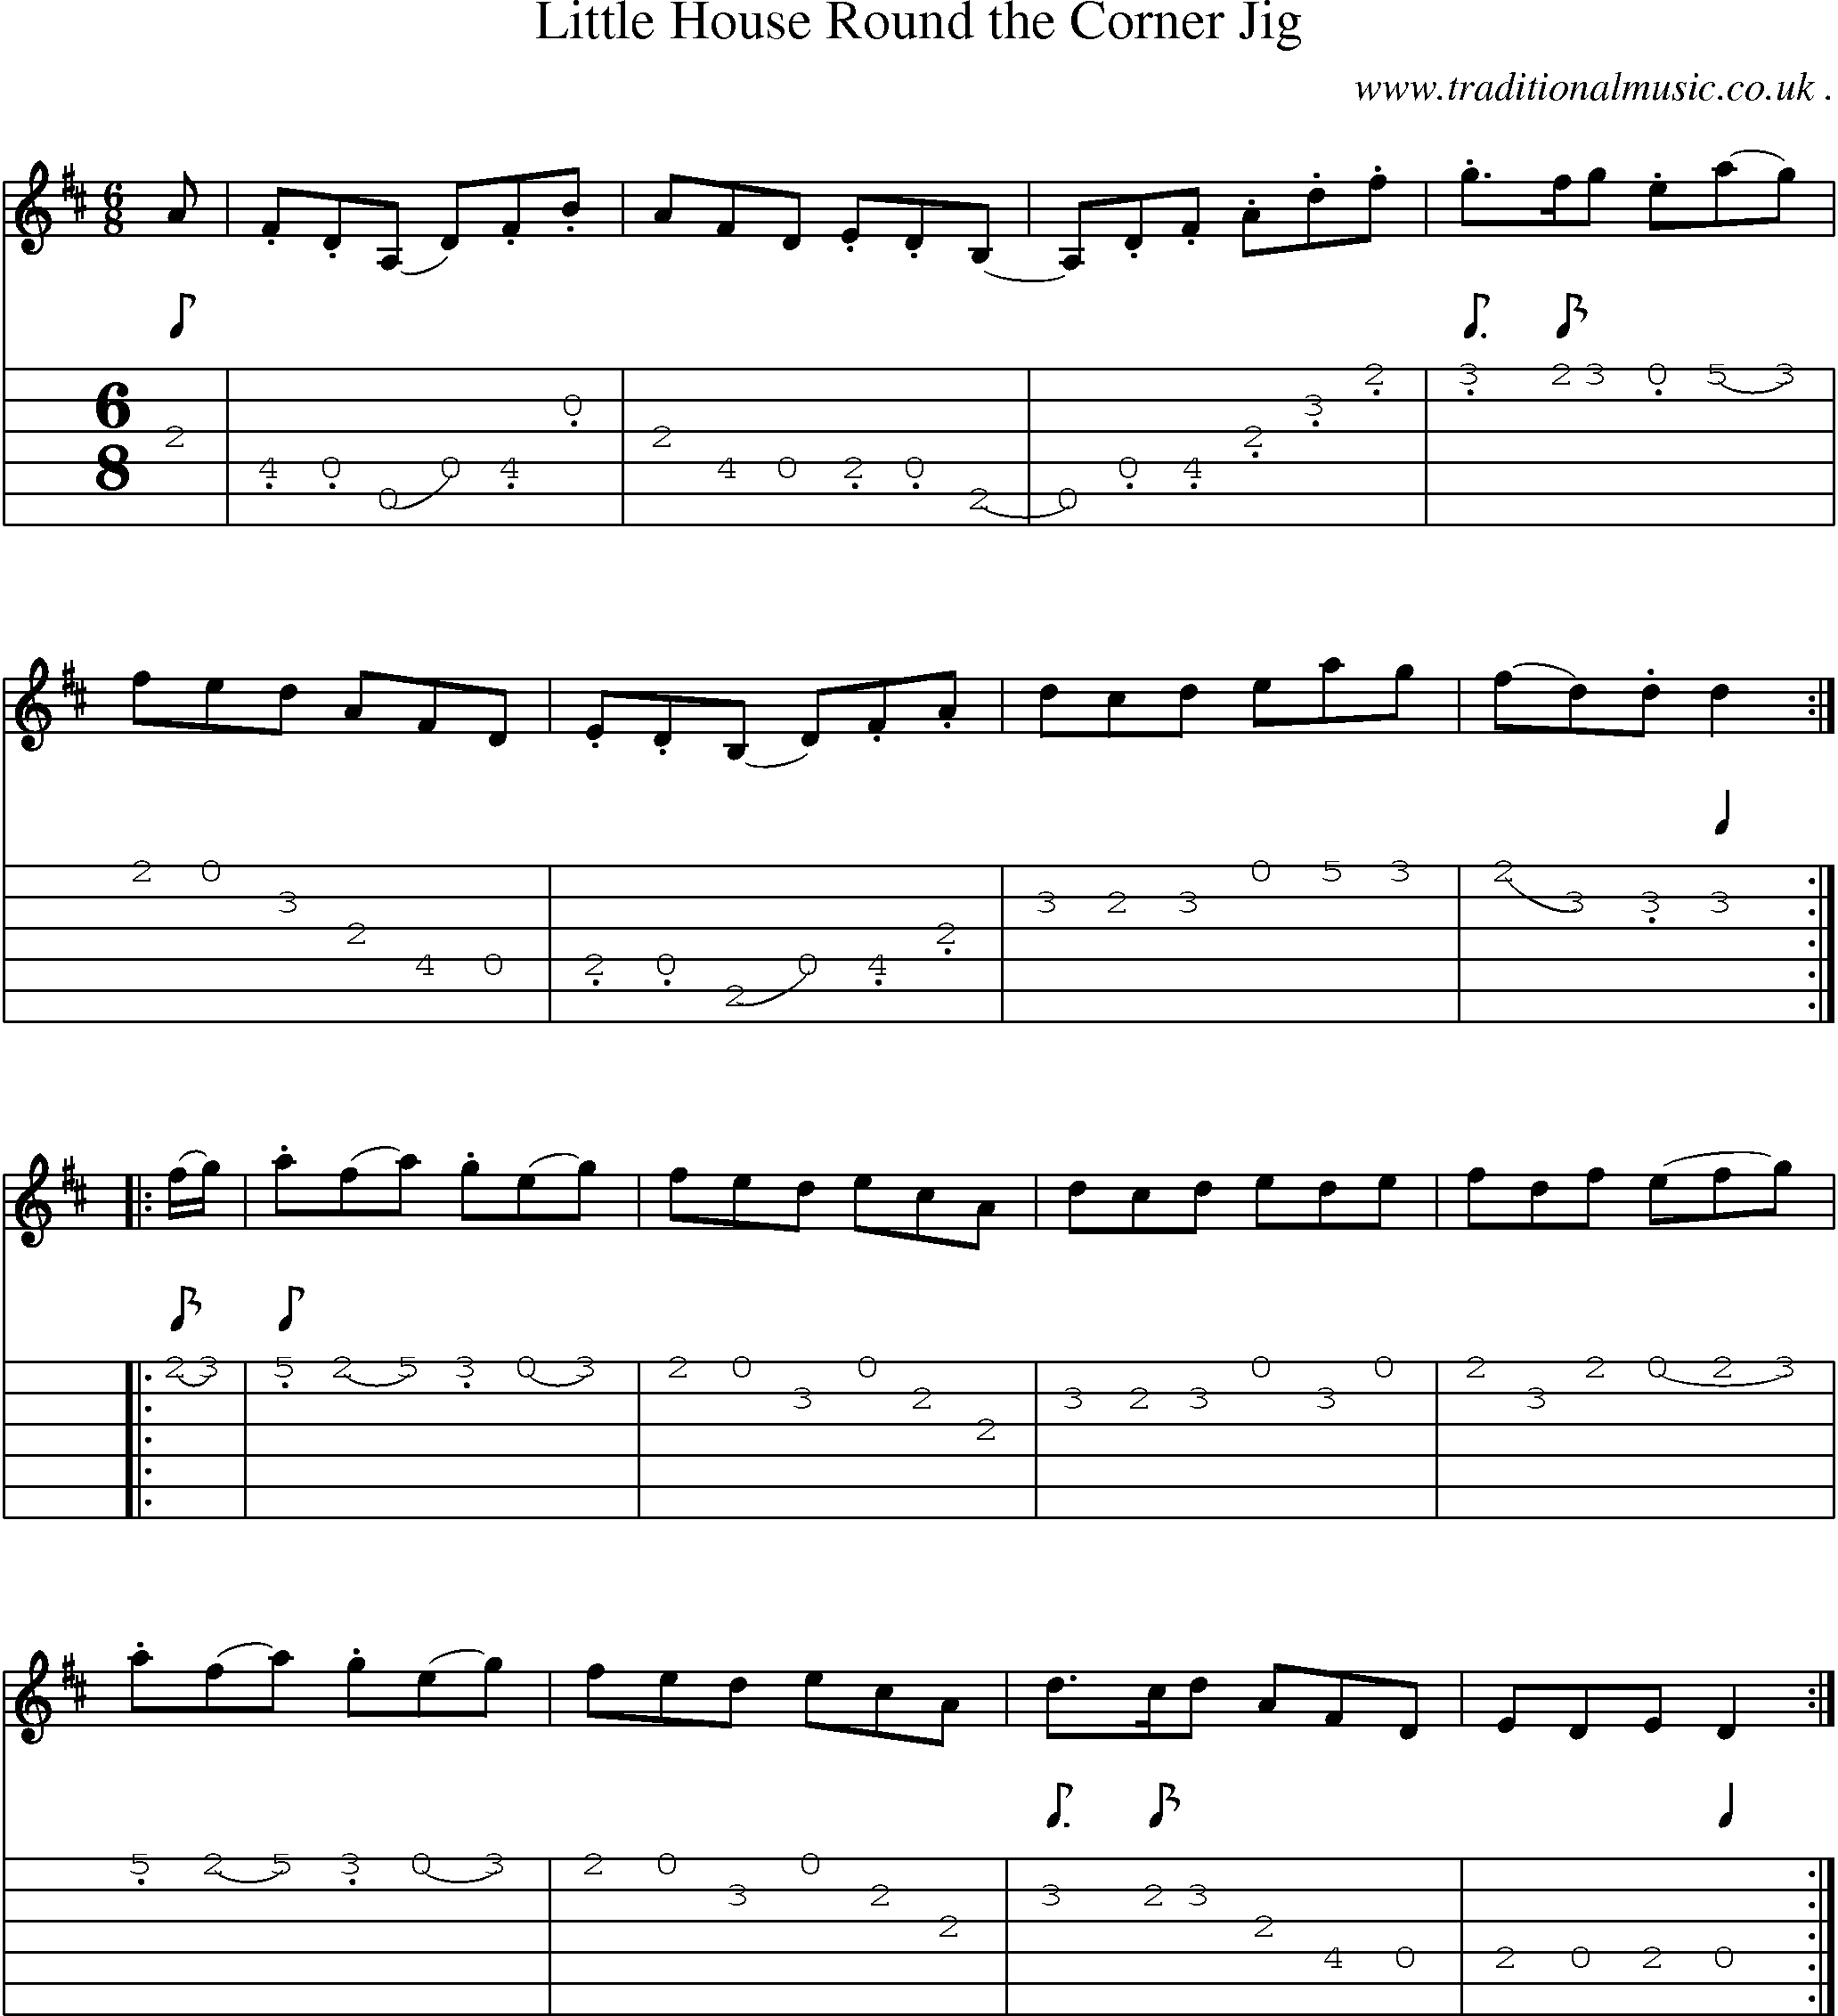 Sheet-Music and Guitar Tabs for Little House Round The Corner Jig